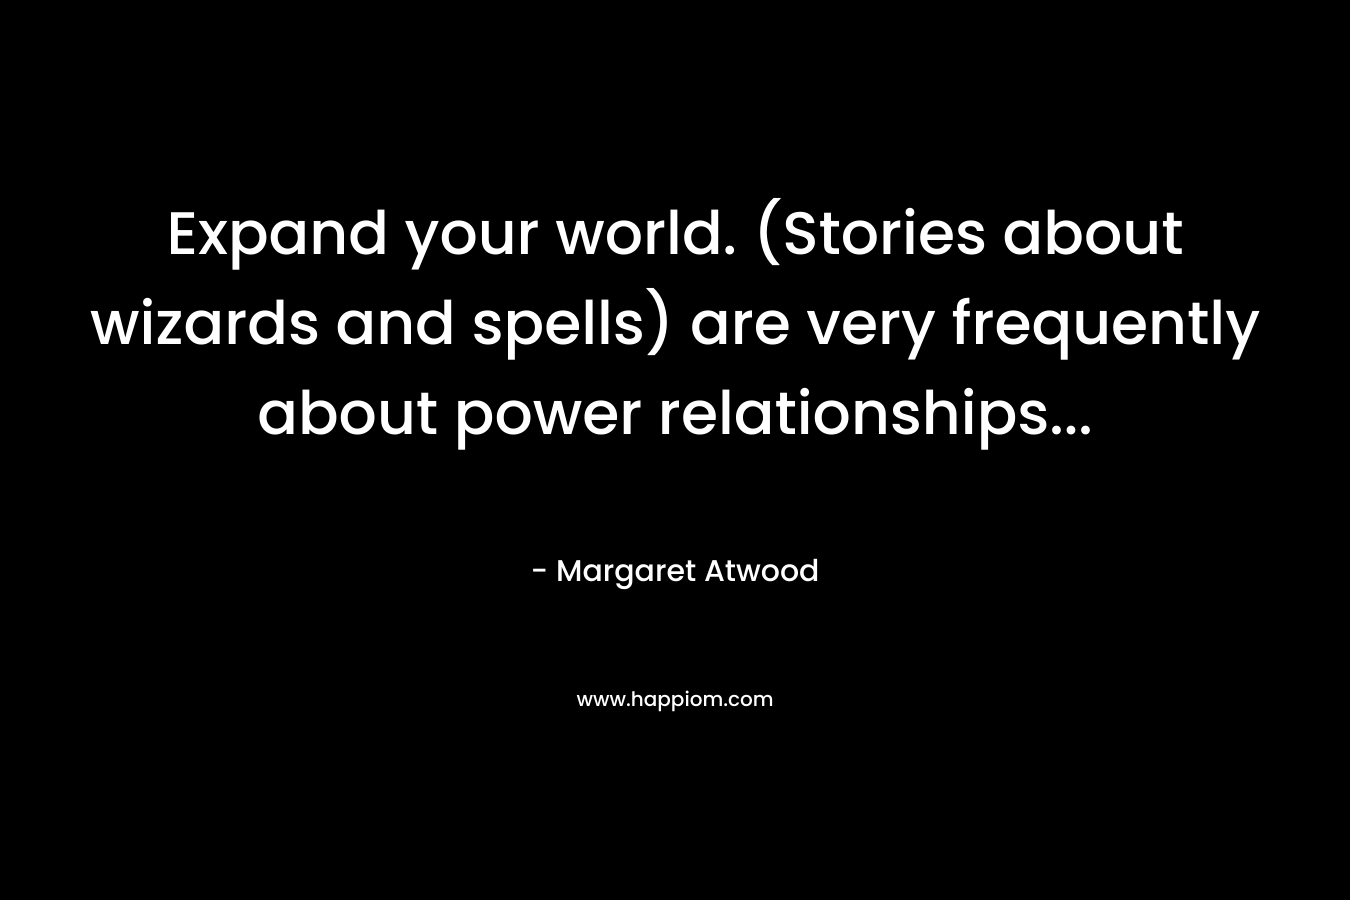 Expand your world. (Stories about wizards and spells) are very frequently about power relationships...